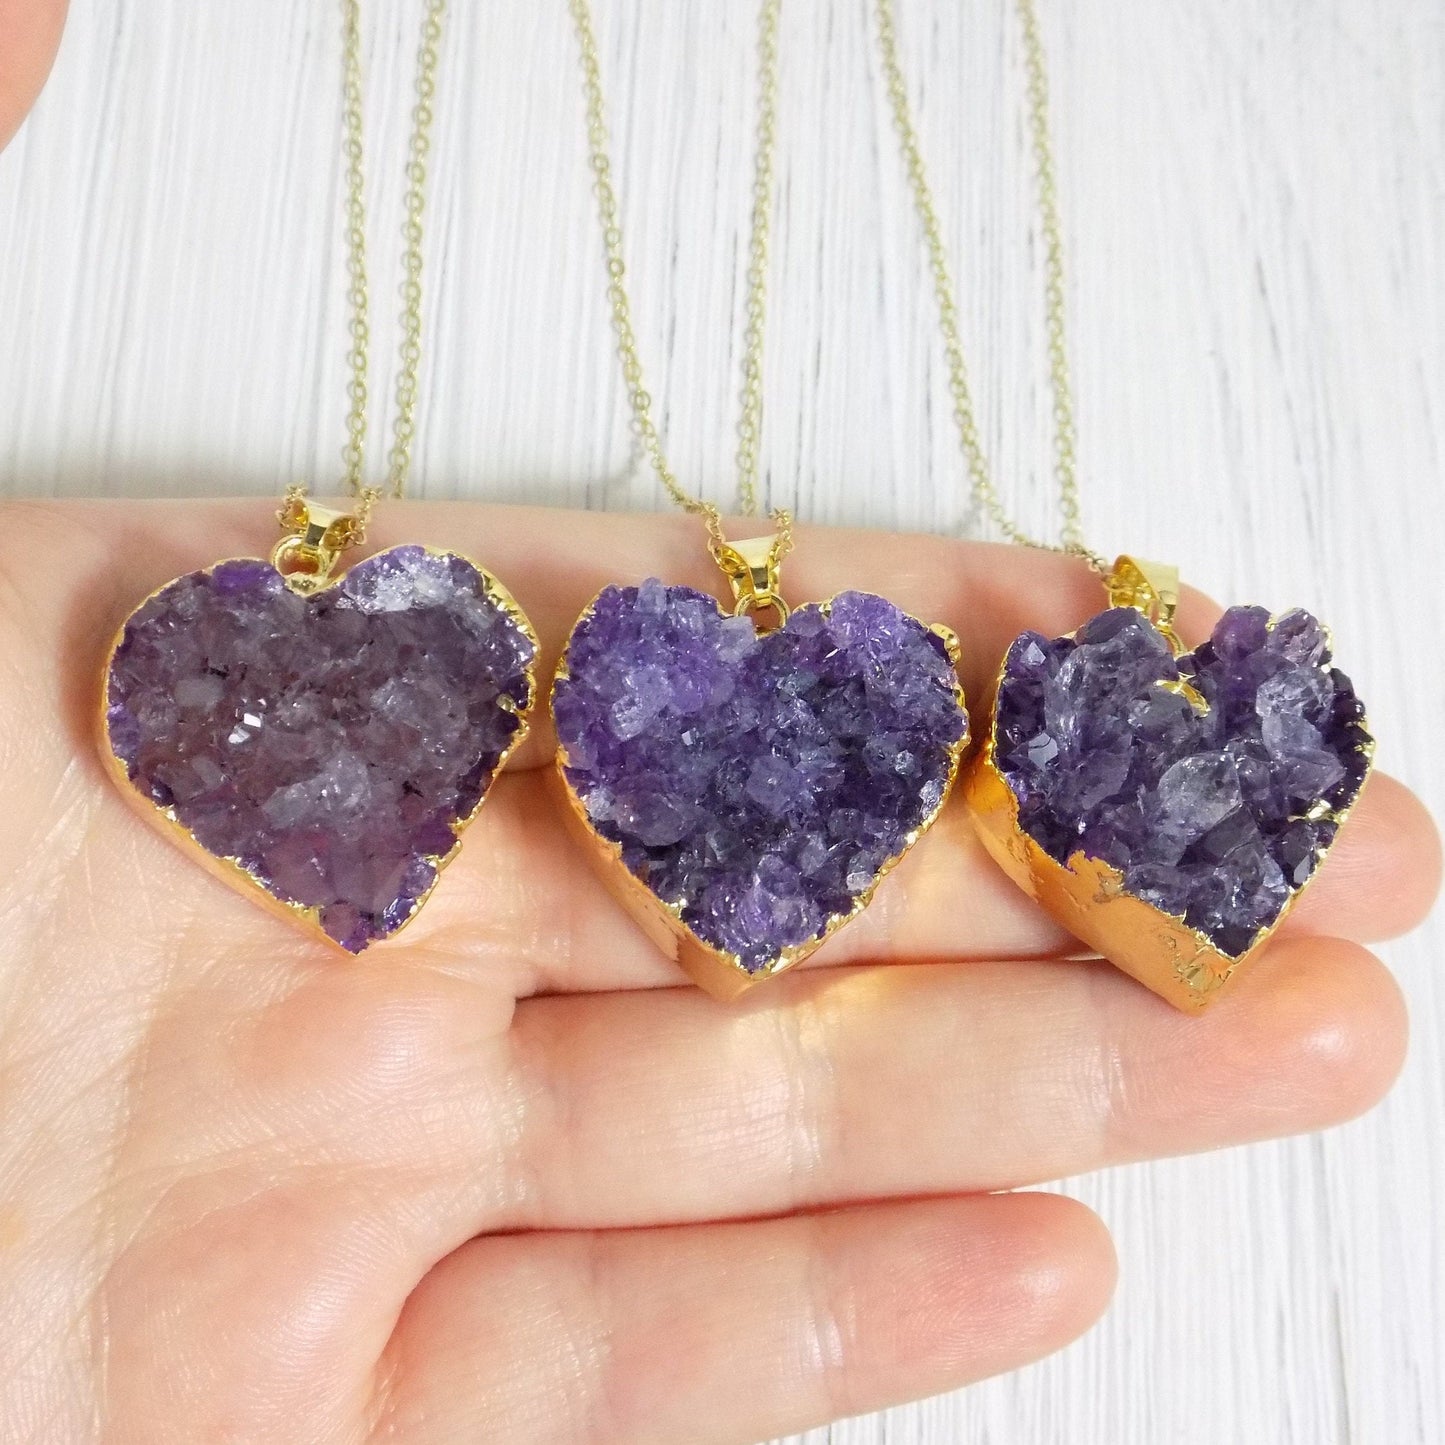 Unique Gifts For Her - Amethyst Necklace Gold